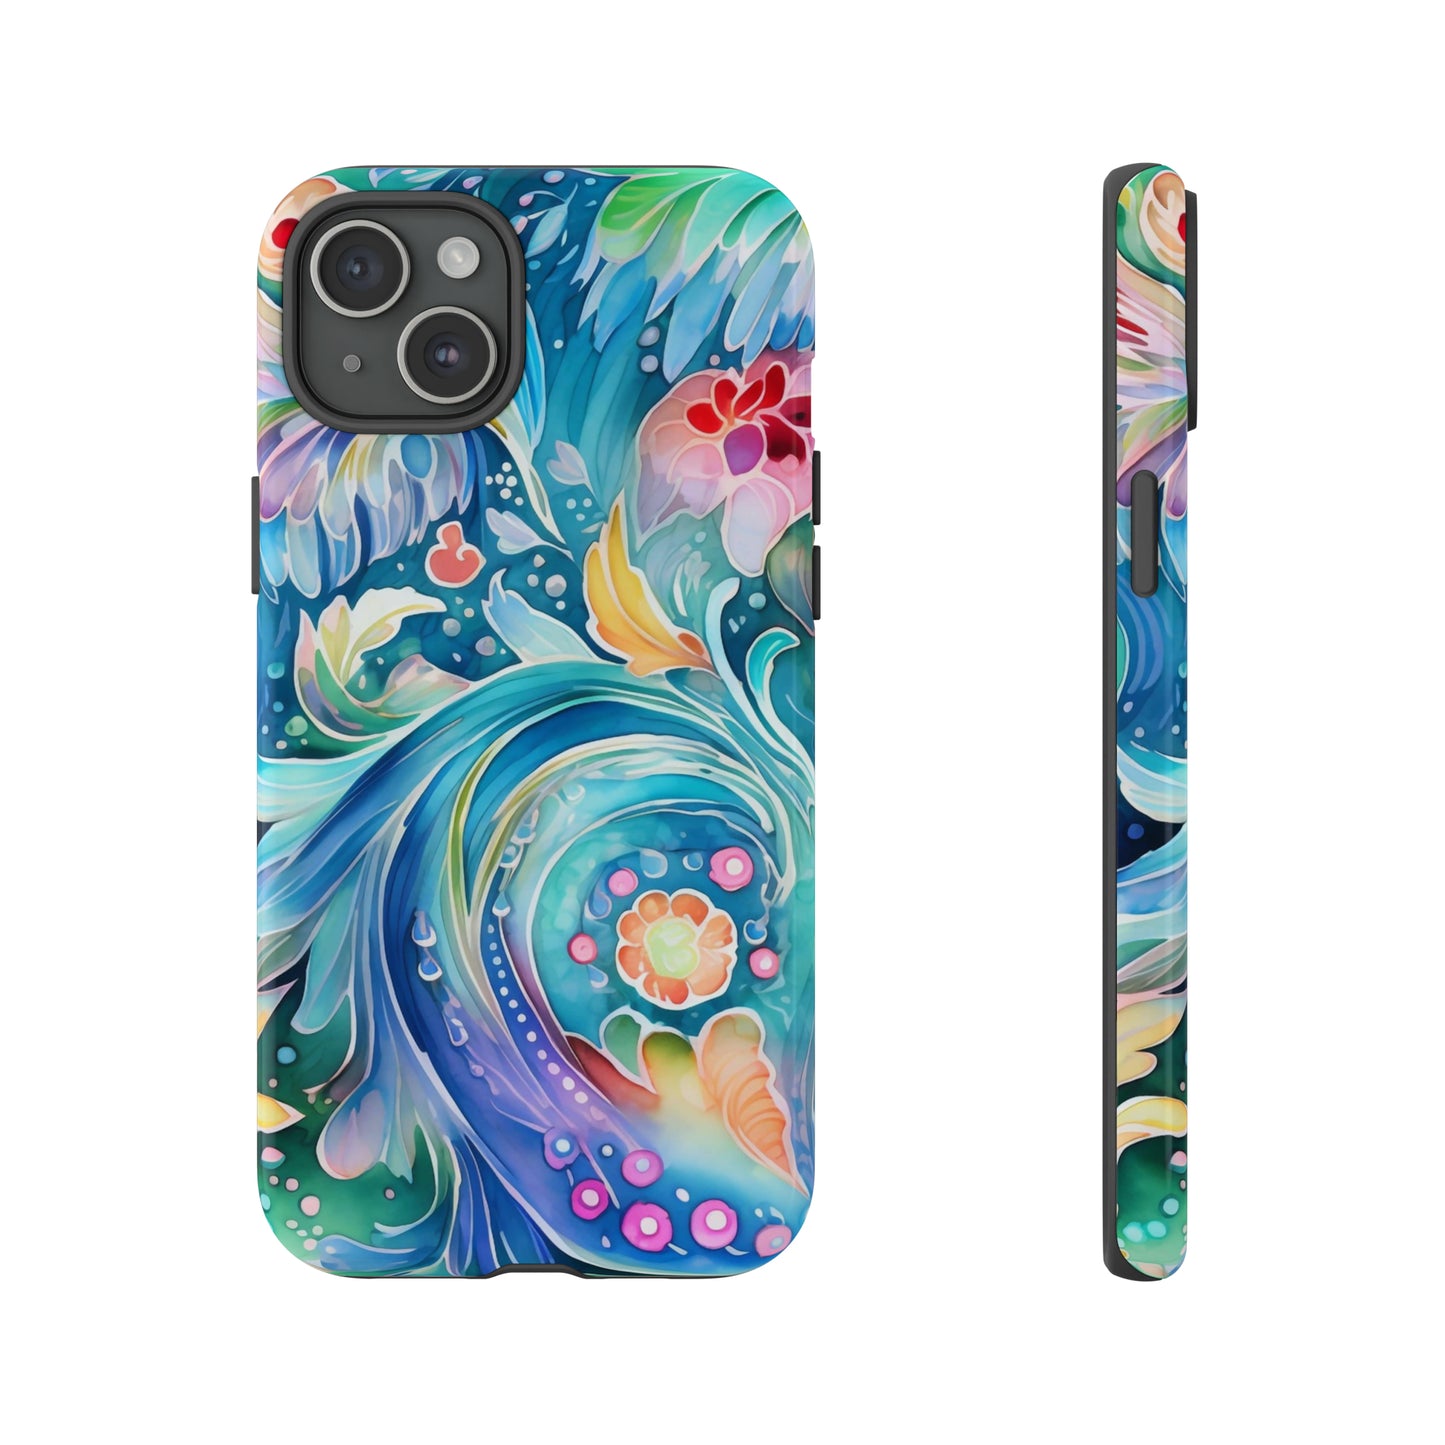 IPhone Cases, Colorful Floran and Swirl IPhone Cases